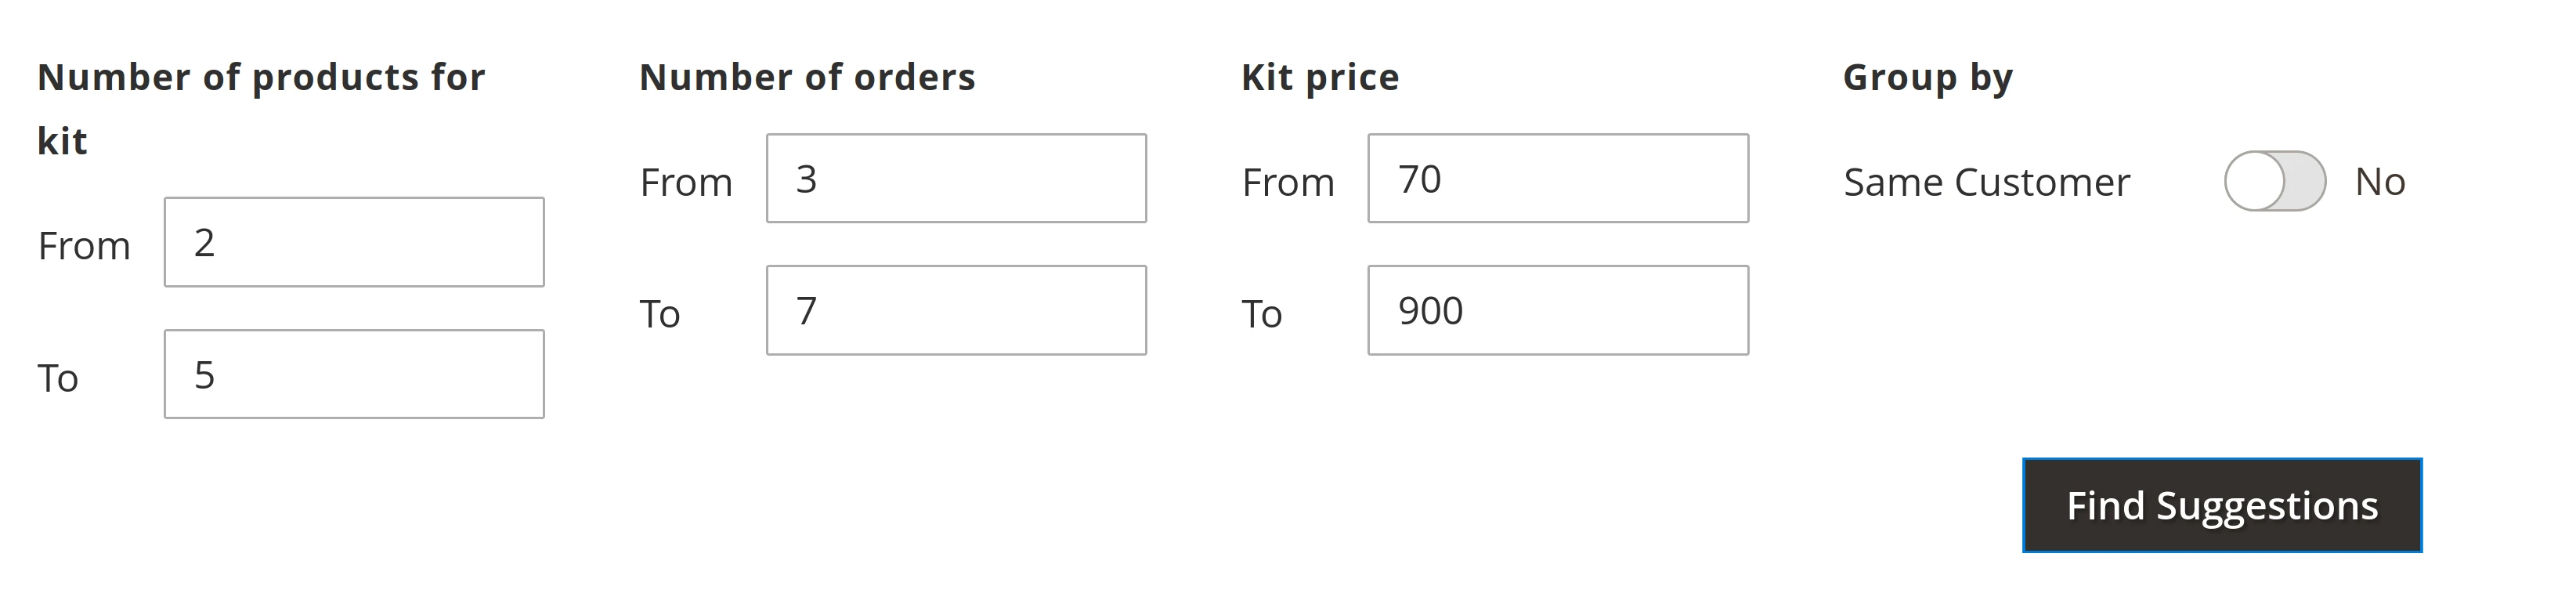 Kit suggestion settings in Mirasvit Magento 2 Buy Together - Product Kits module